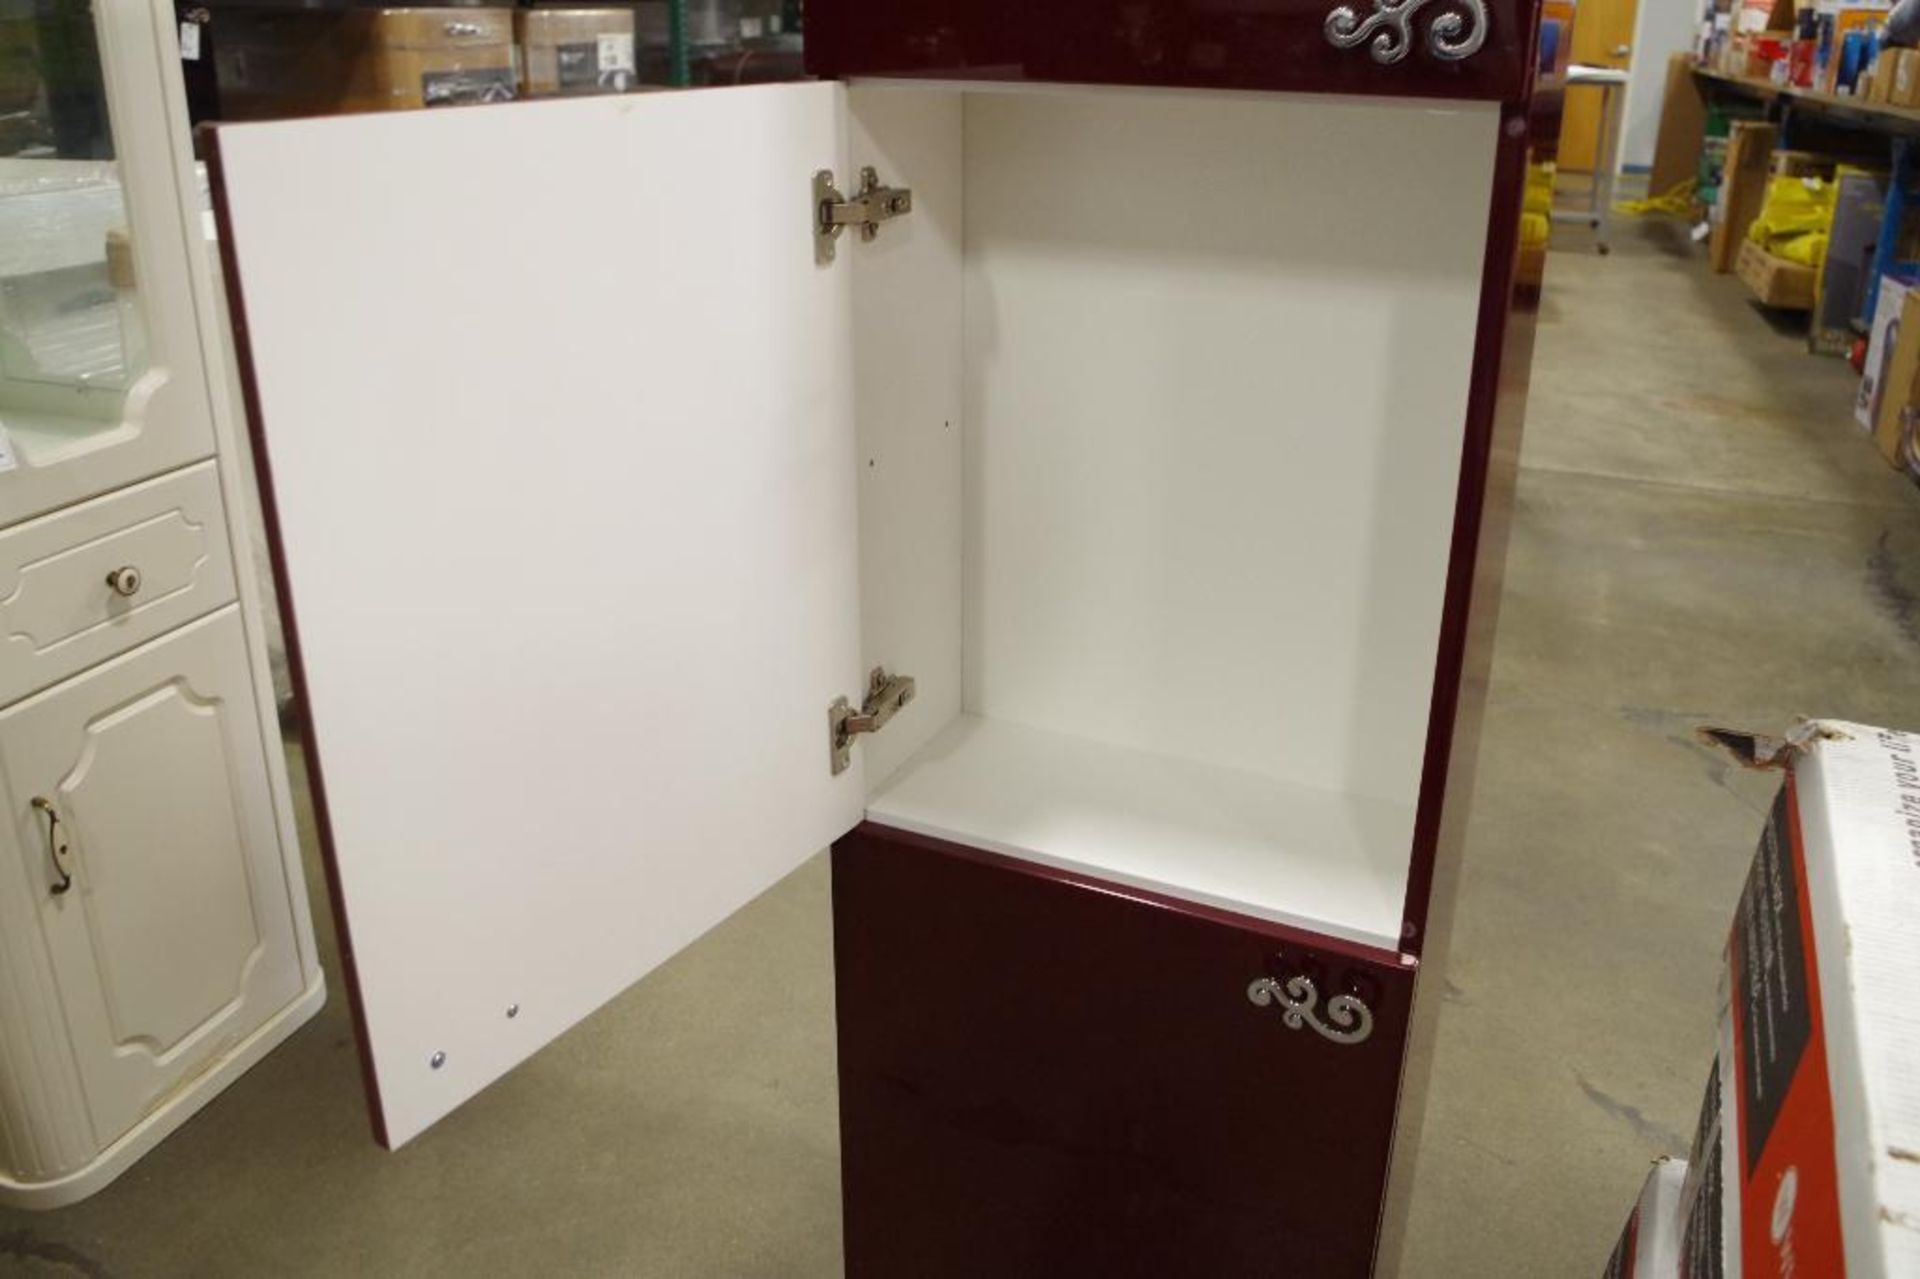 NEW BELUX Side Storage Cabinet, Approx. 18-1/4" W x 9-1/4" D x 66-1/2" T - Image 3 of 6